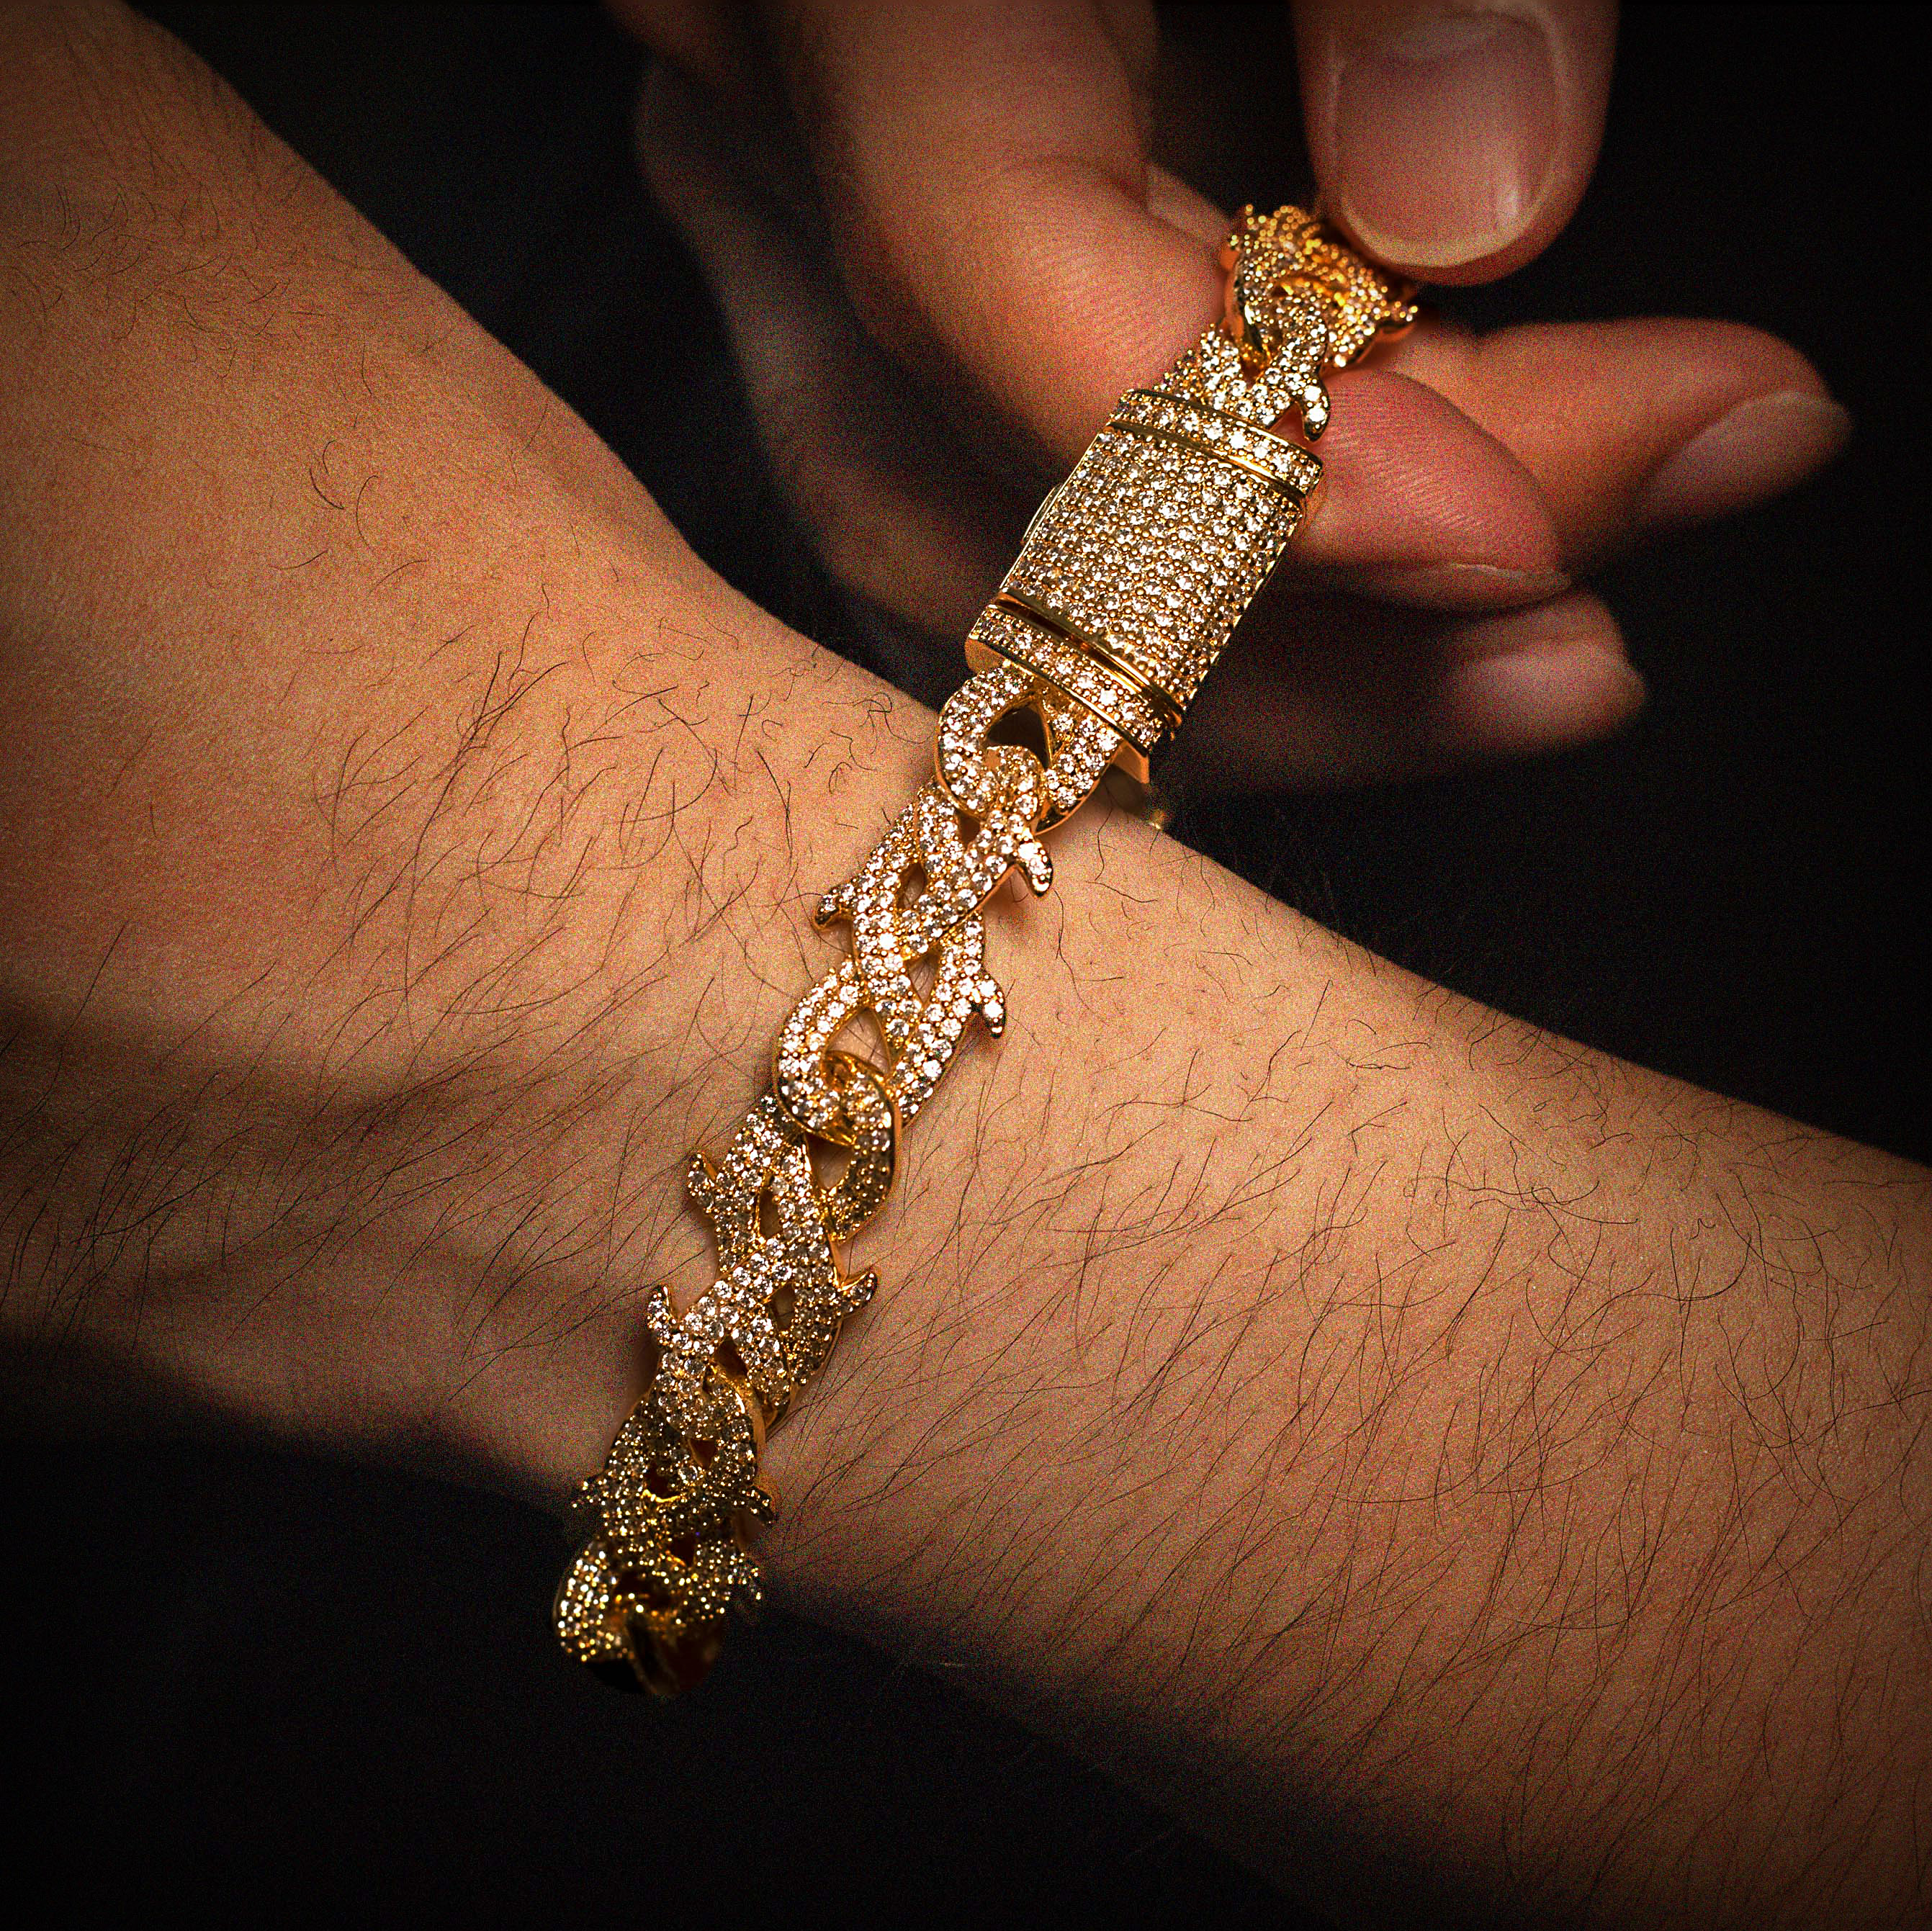 8" Golden Iced Out Diamond Spiked Thorns Cuban Chain Bracelets Sulludd